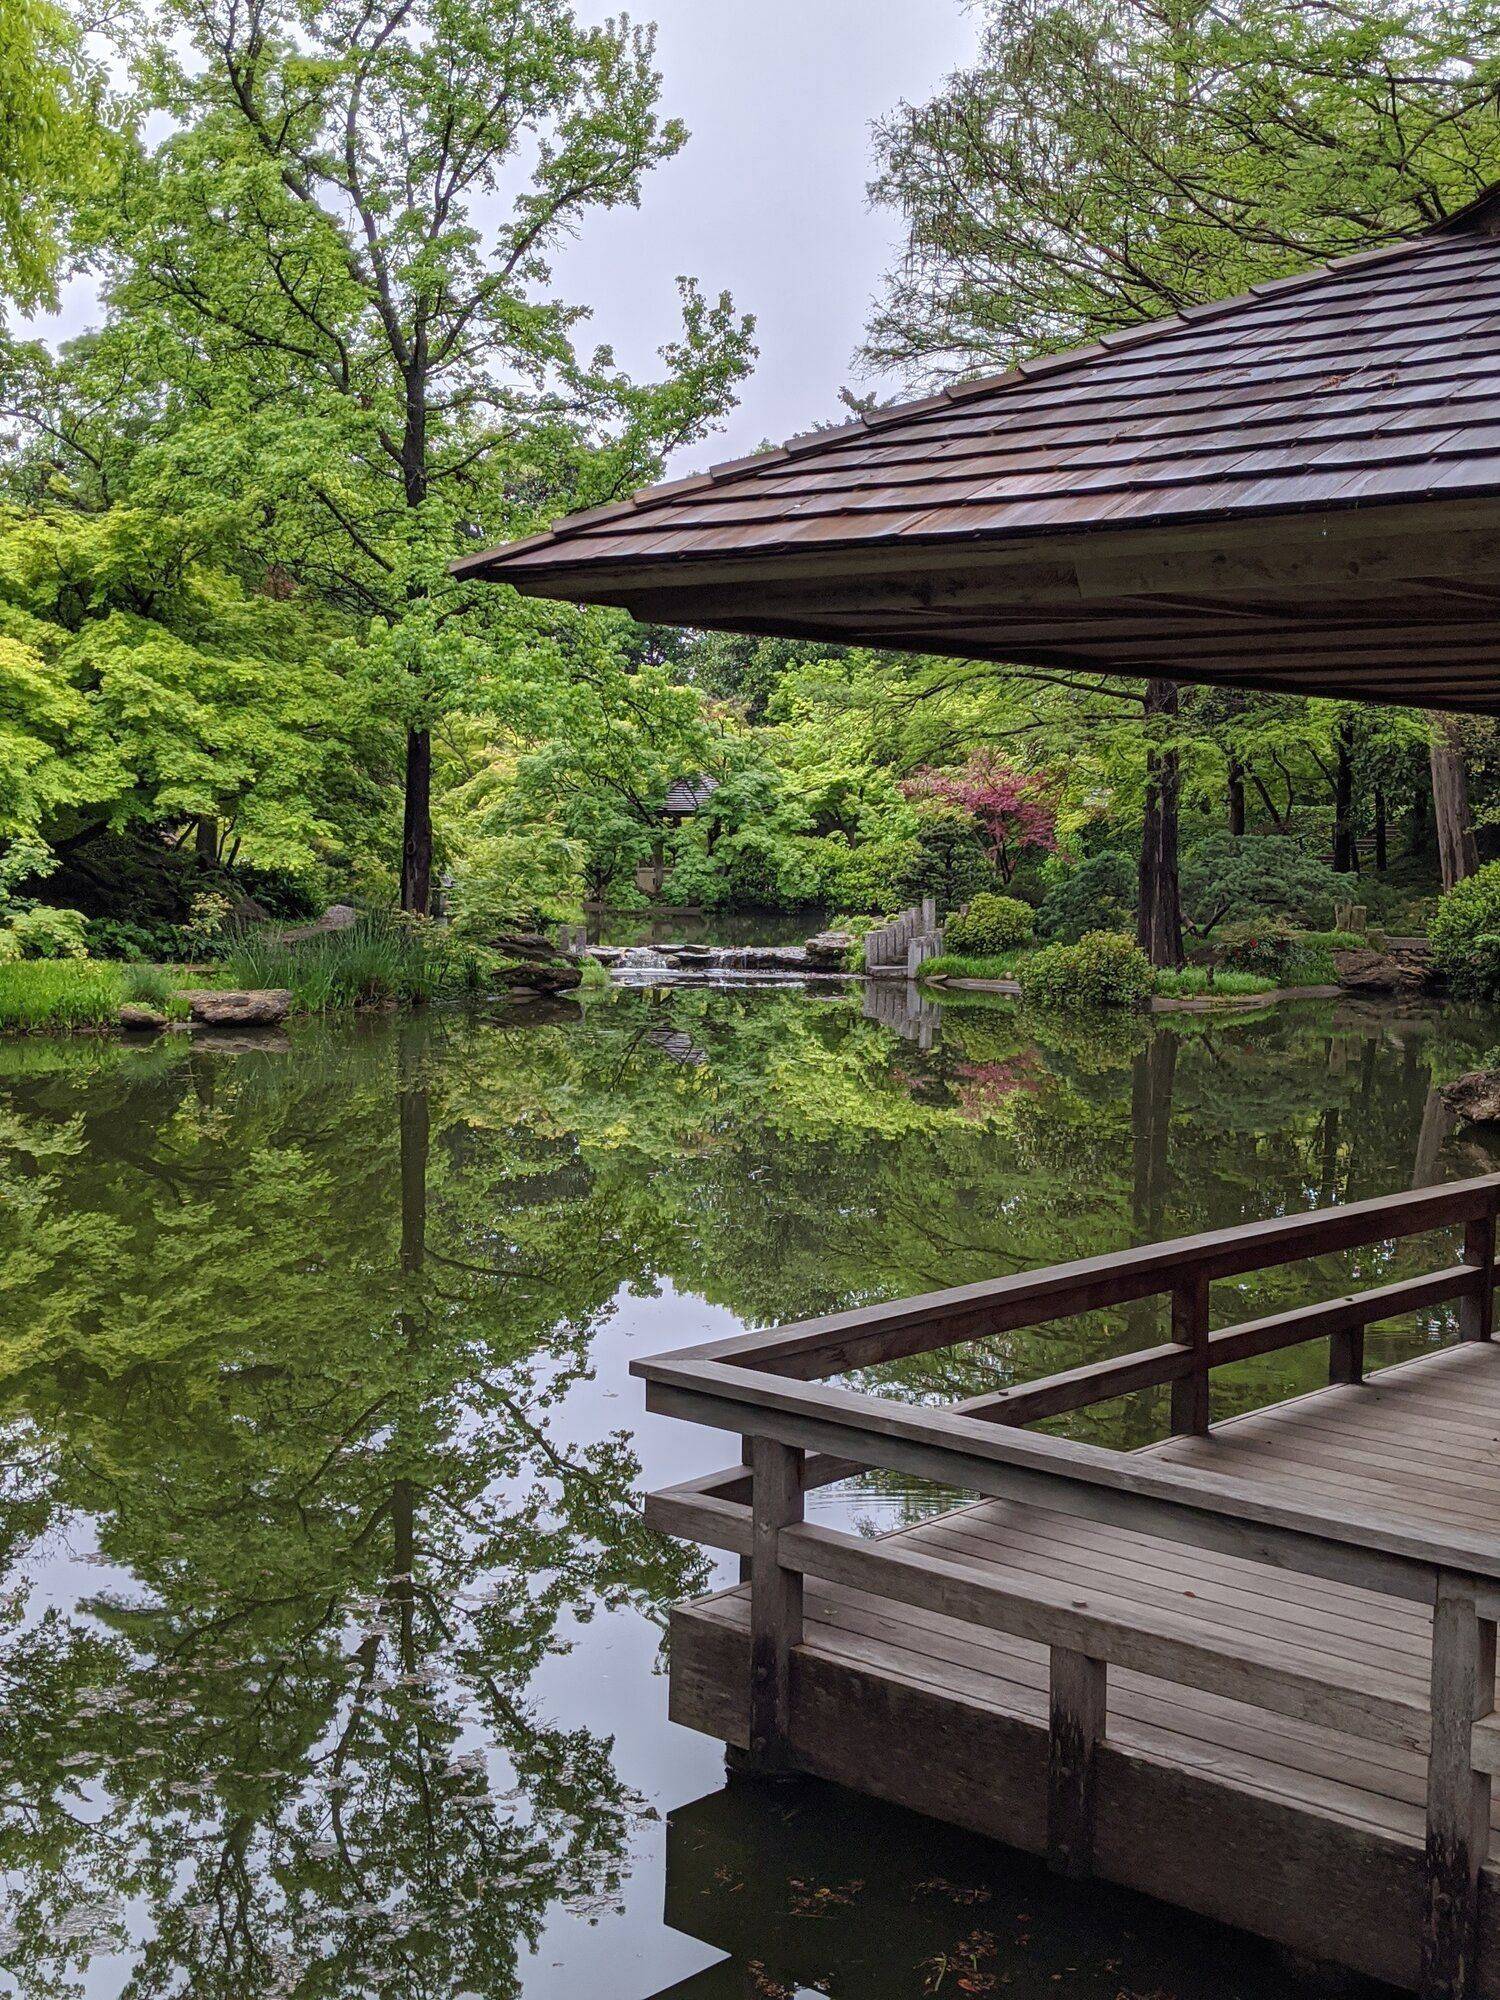 The Most Authentic Japanese Garden